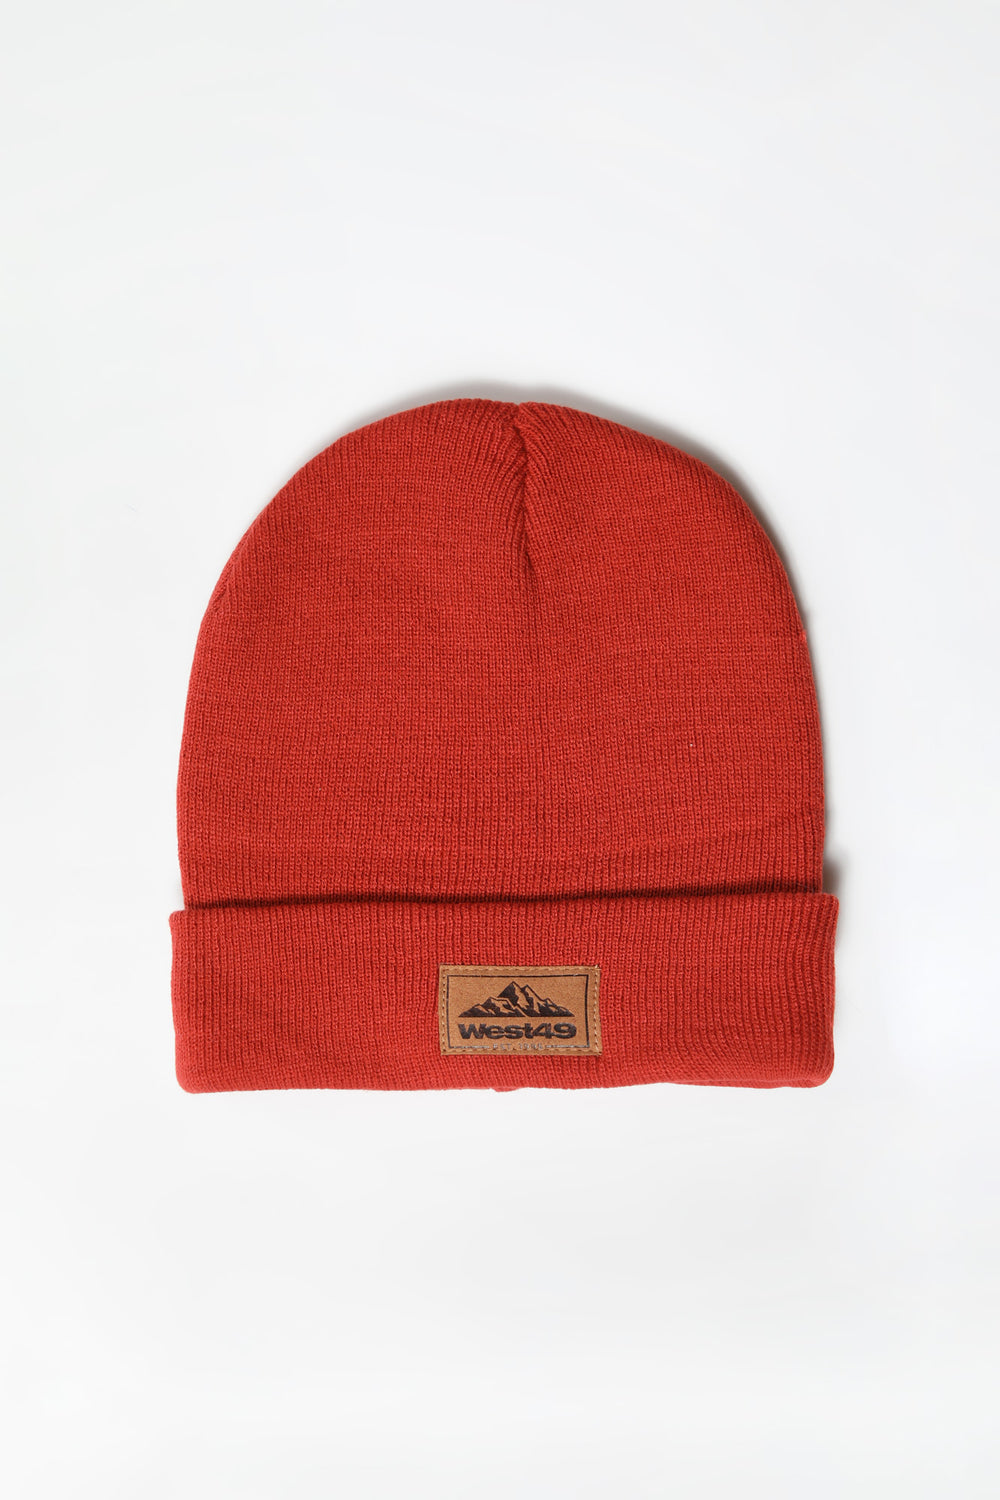 West49 Youth Mountain Patch Foldup Beanie Rust